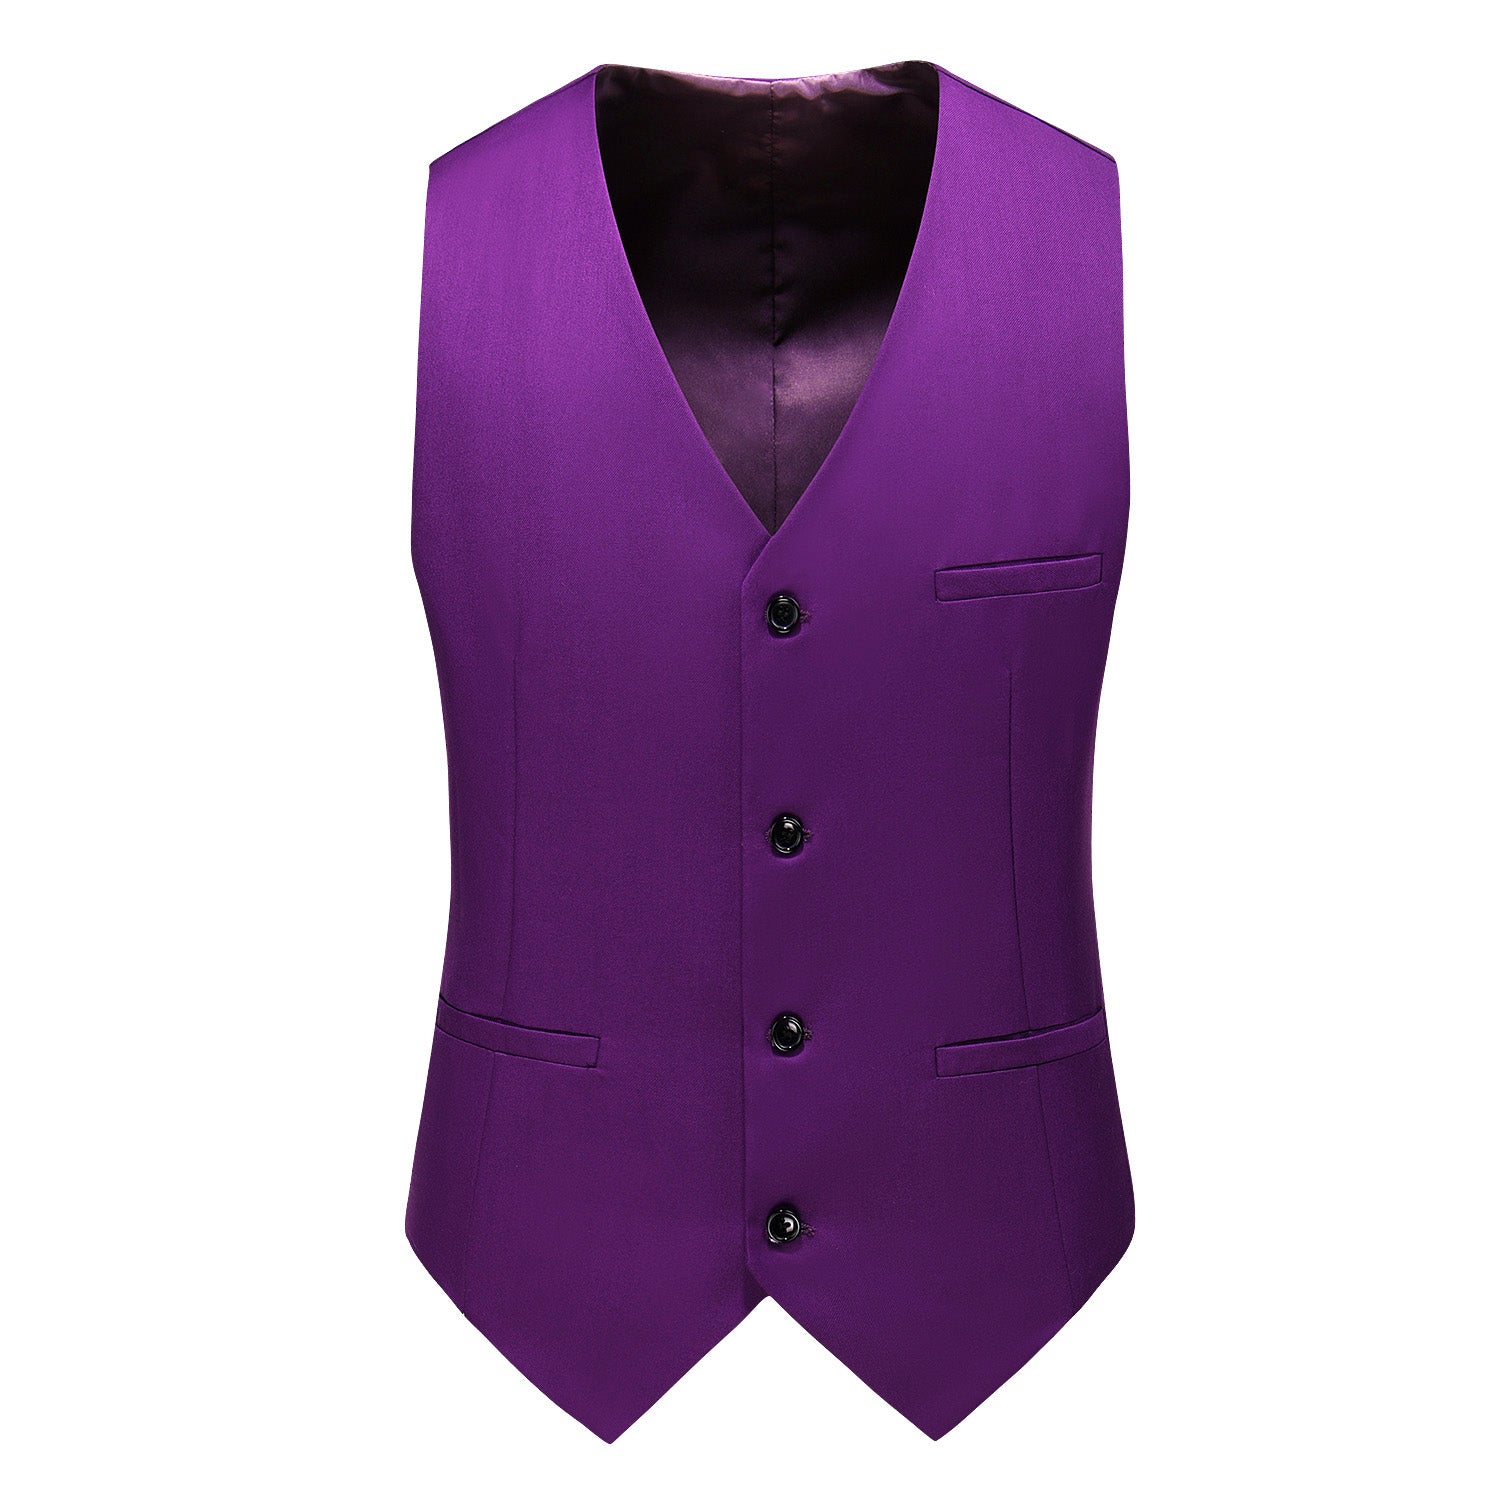 Men's Single Breasted Stylish Plain Vest Slim Fit Solid Waistcoat For Prom Groomsman Wedding Party